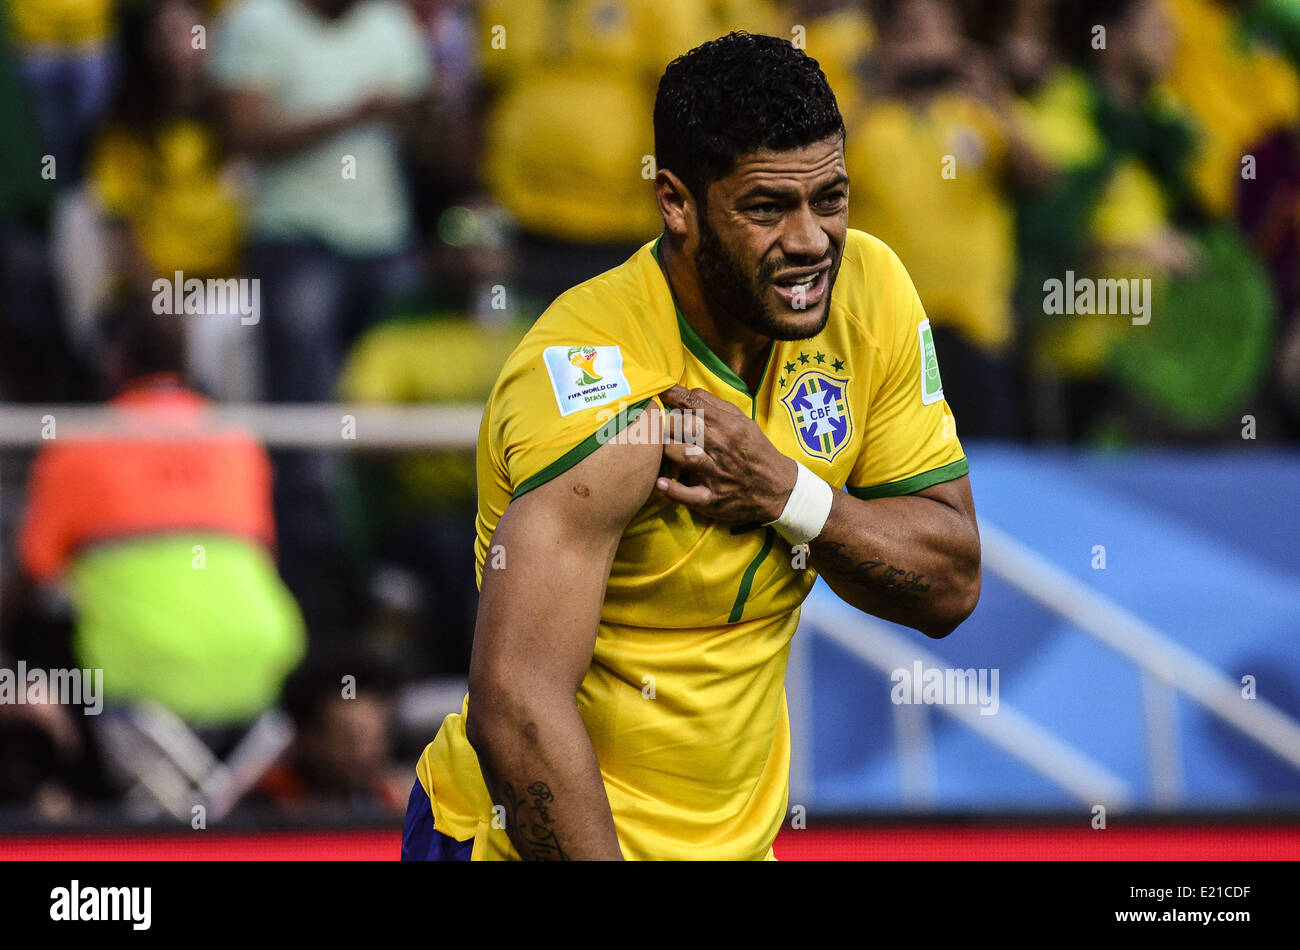 Sao Paulo, Brazil. 12th June, 2014. Hulk complains of pain after a foul. General scenes of Brasil x Croatia in the first match of the World Cup, in Sao Paulo, Brasil Credit:  Gustavo Basso/NurPhoto/ZUMAPRESS.com/Alamy Live News Stock Photo